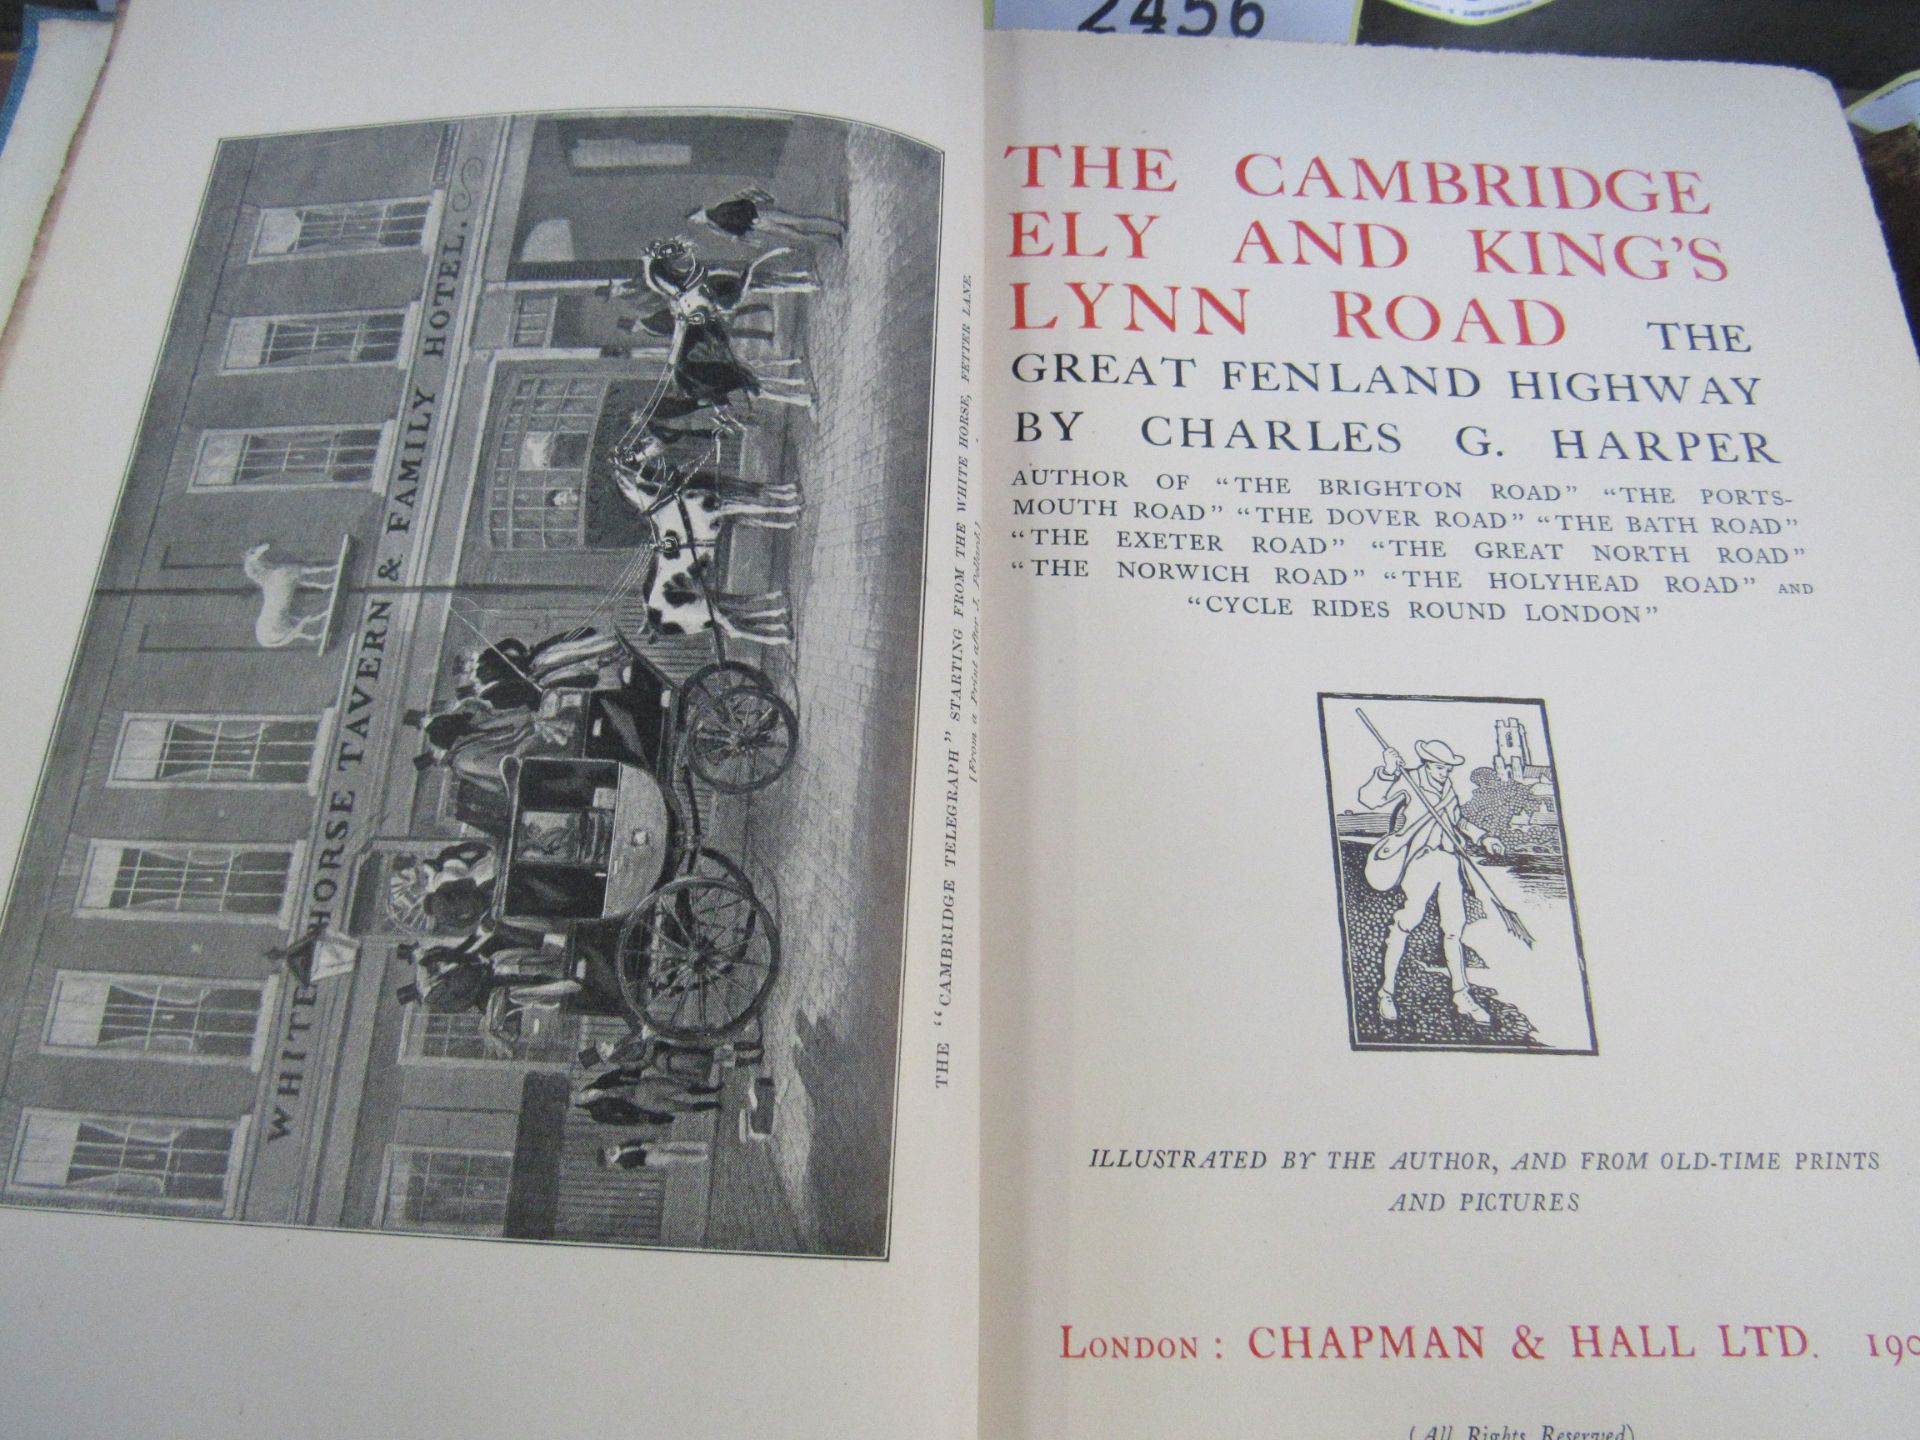 The Cambridge, Ely and Kings Lynn Road printed 1902 by Chapman and Hall; and The Hastings Road